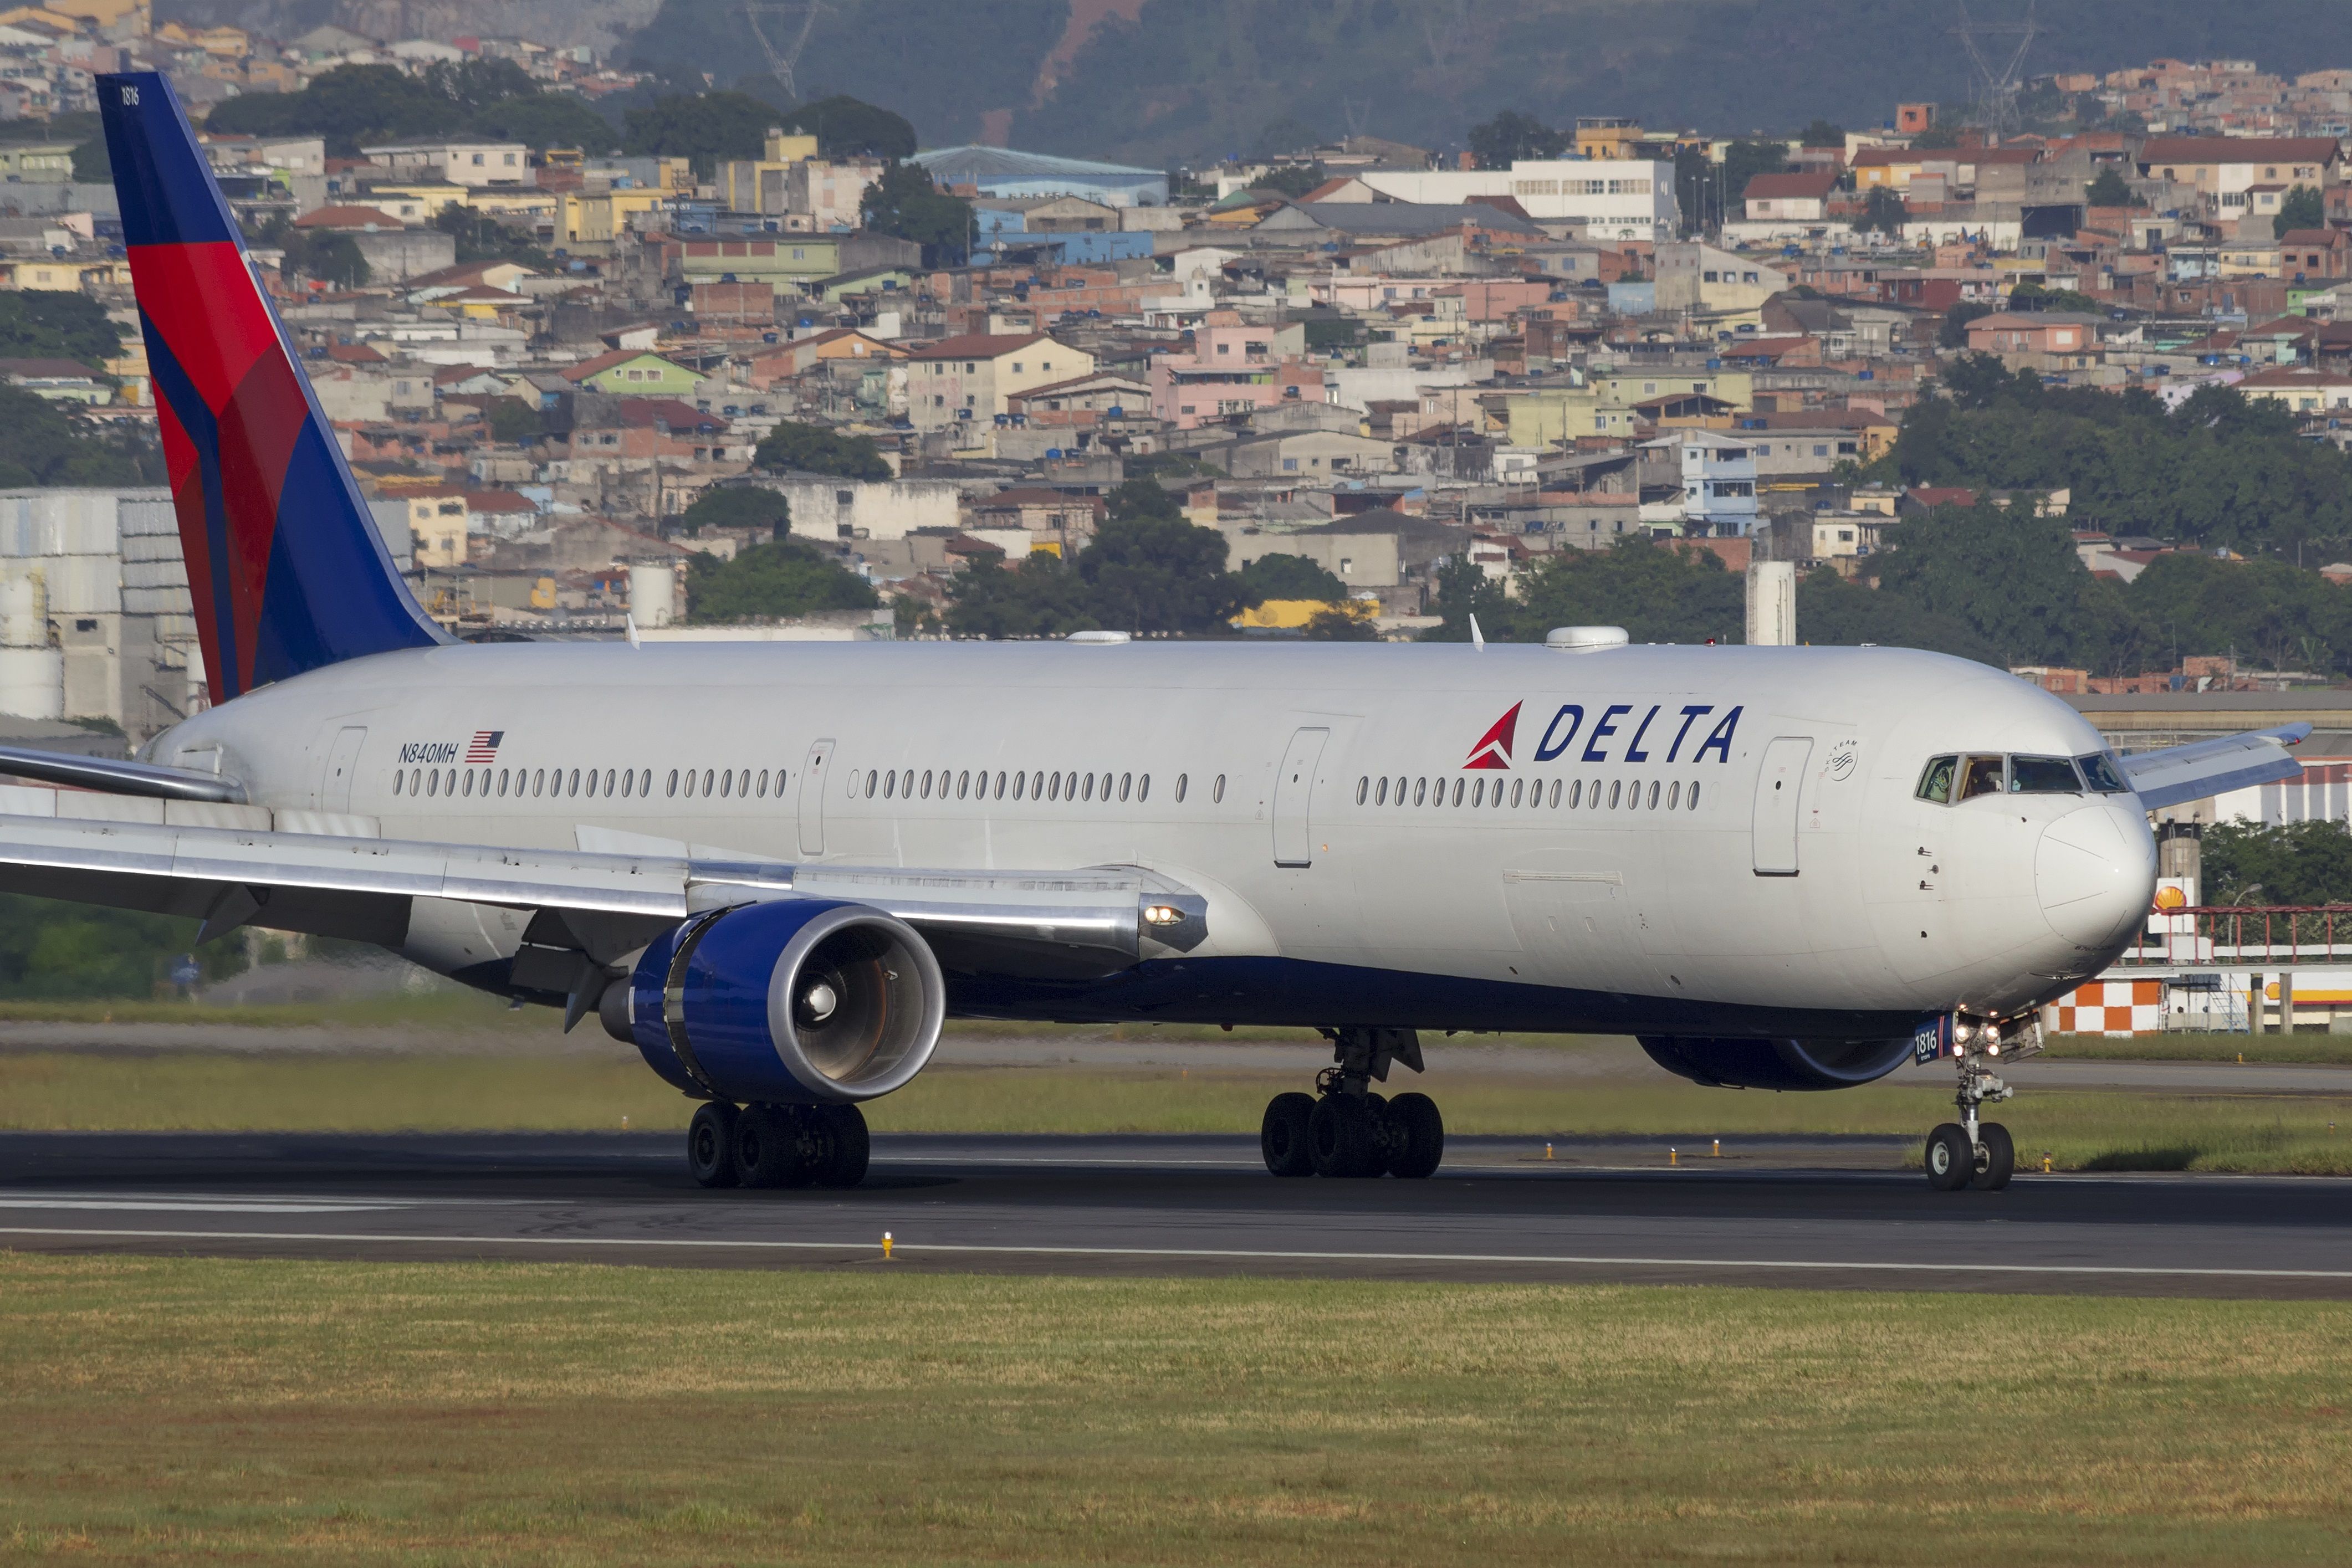 A Delta Air Lines Boeing 767-400ER on an airport apron.